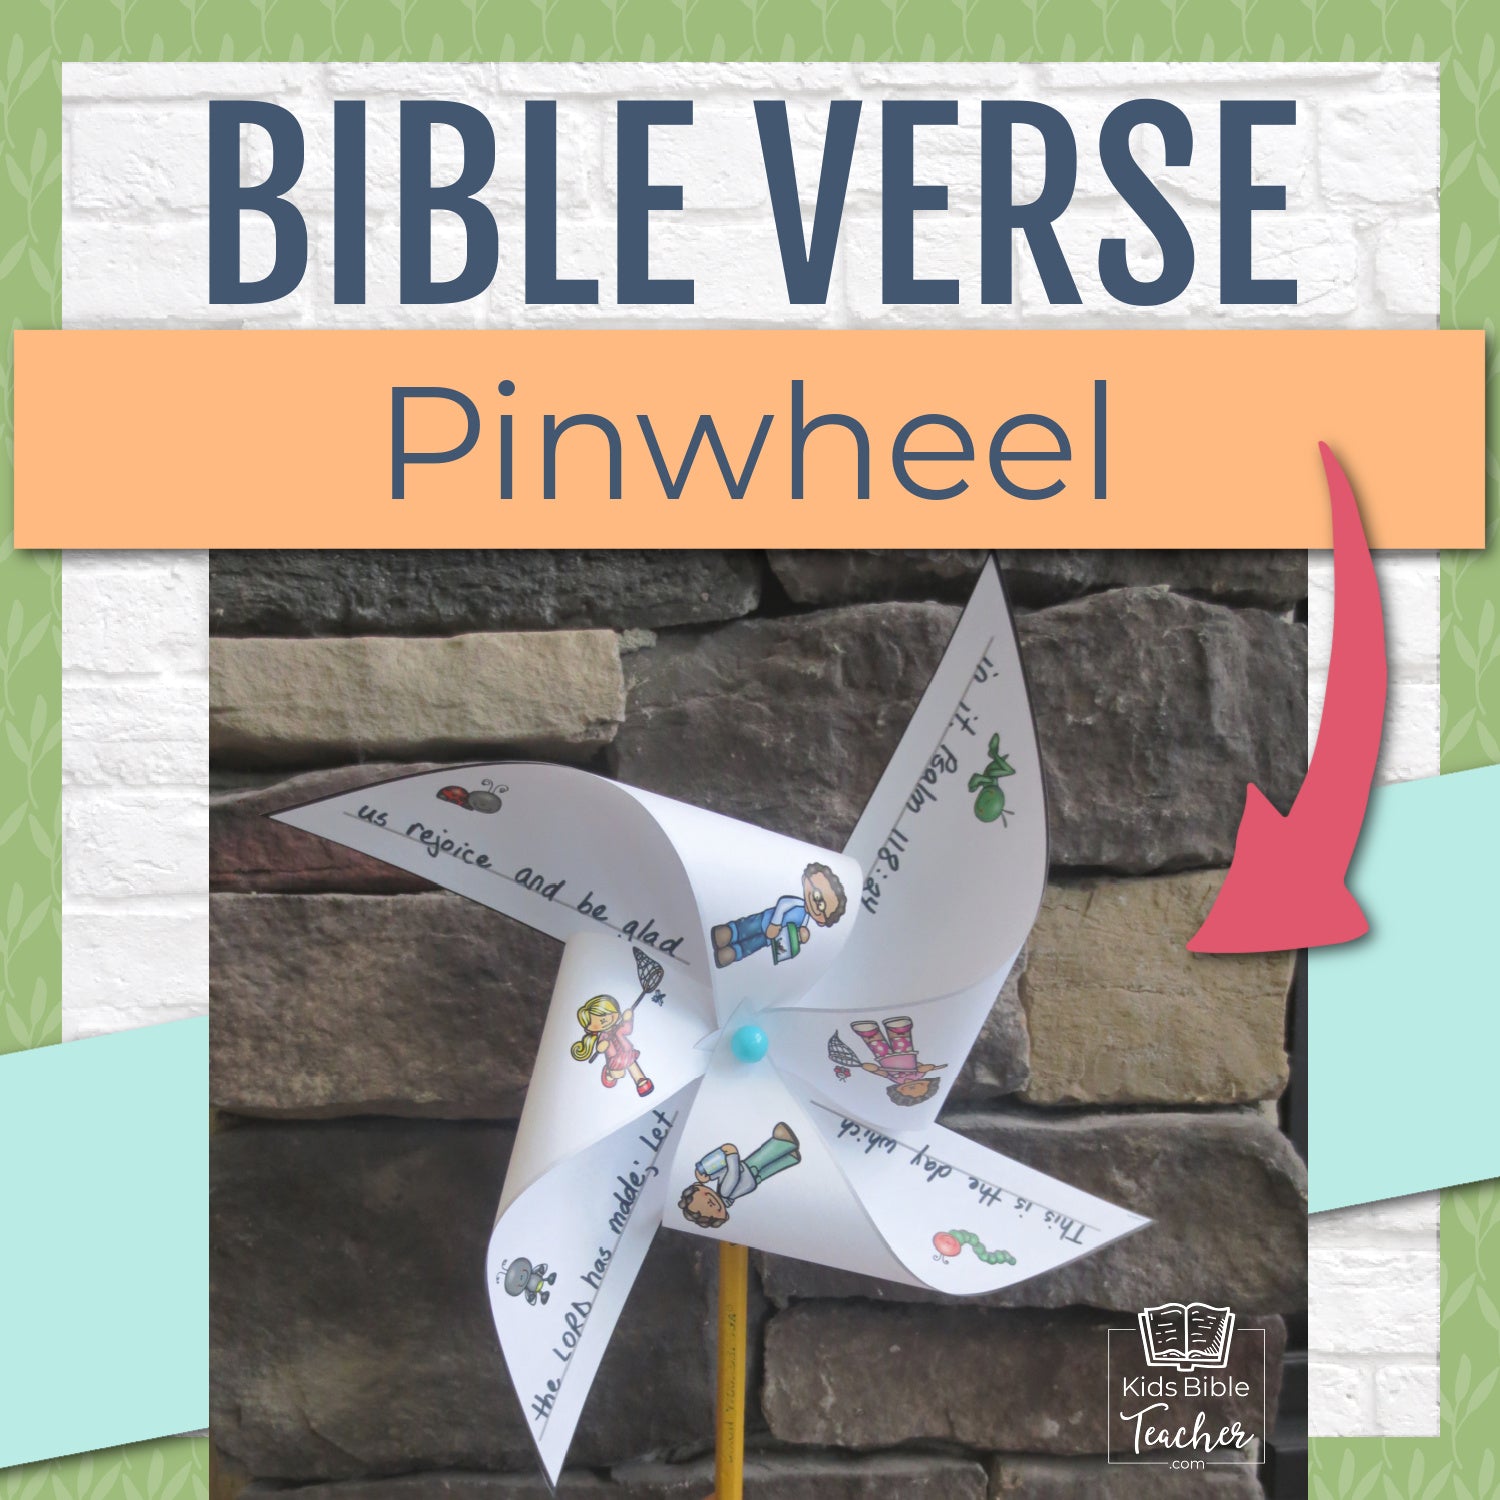 10 Bible Crafts to Help Kids Memorize ANY Bible Verses Set Two